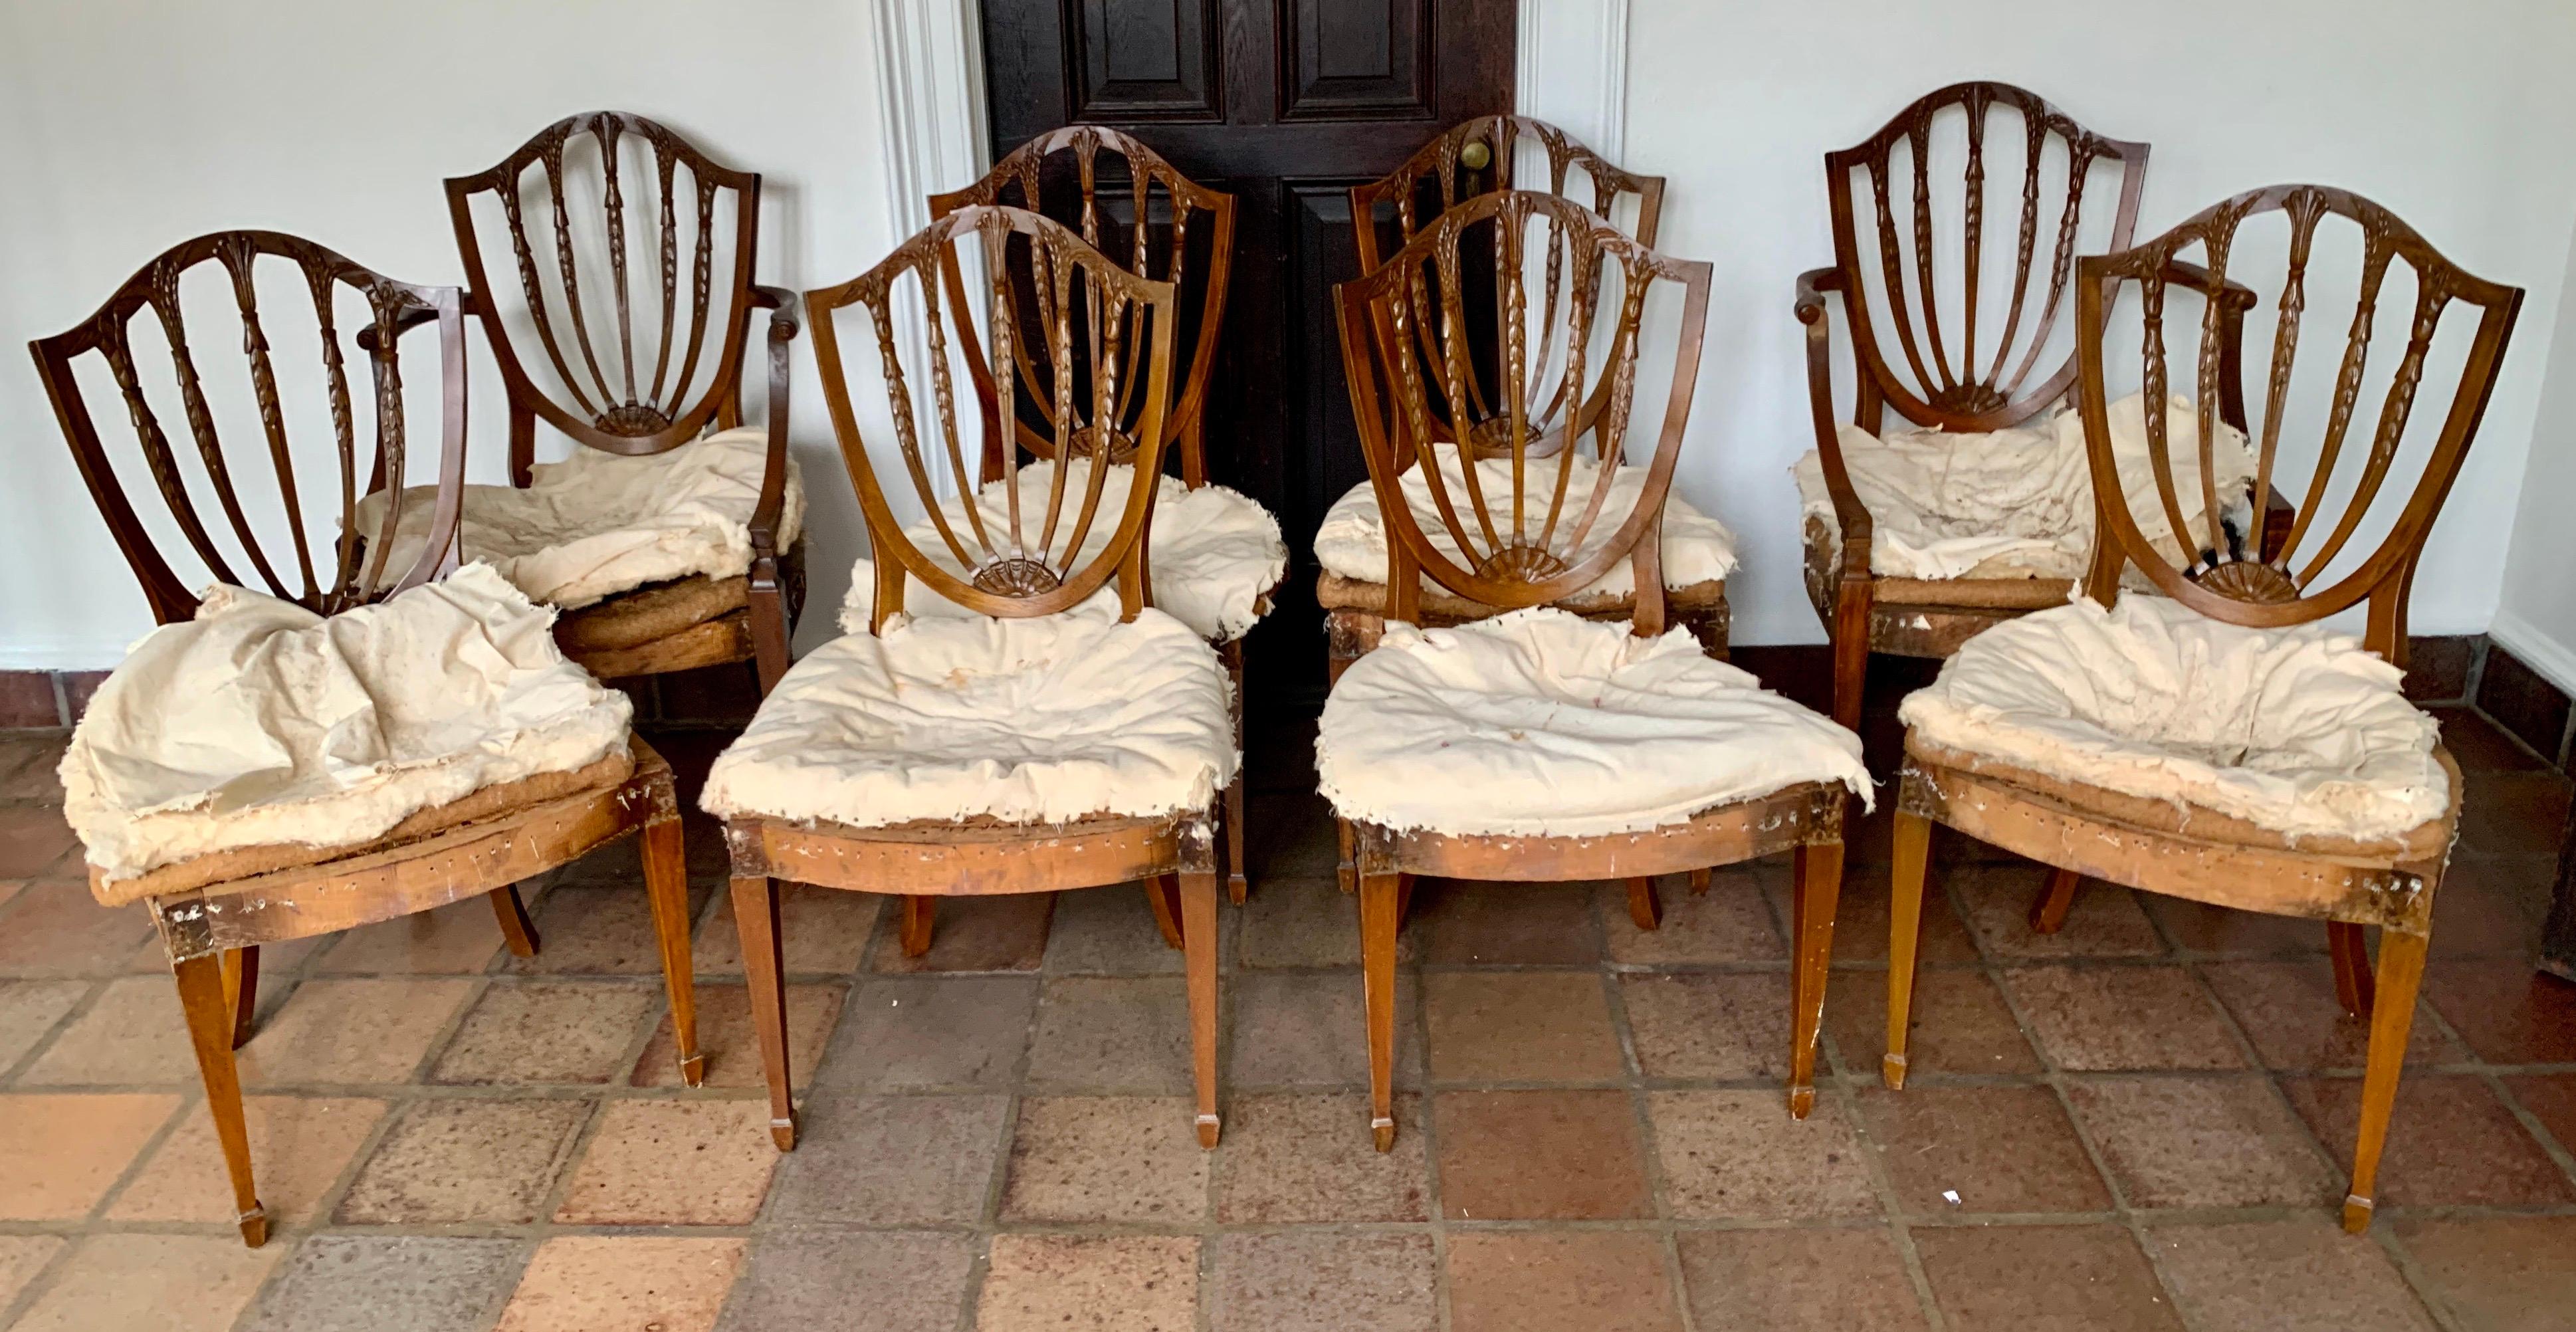 Constructed from quality mahogany with a shield shaped backrest with an intricately carved wheat sheaf design standing on squared tapered legs. Rare Hepplewhite set of eight dining chairs, circa 1840s. Being sold ready to reupholster with no seat